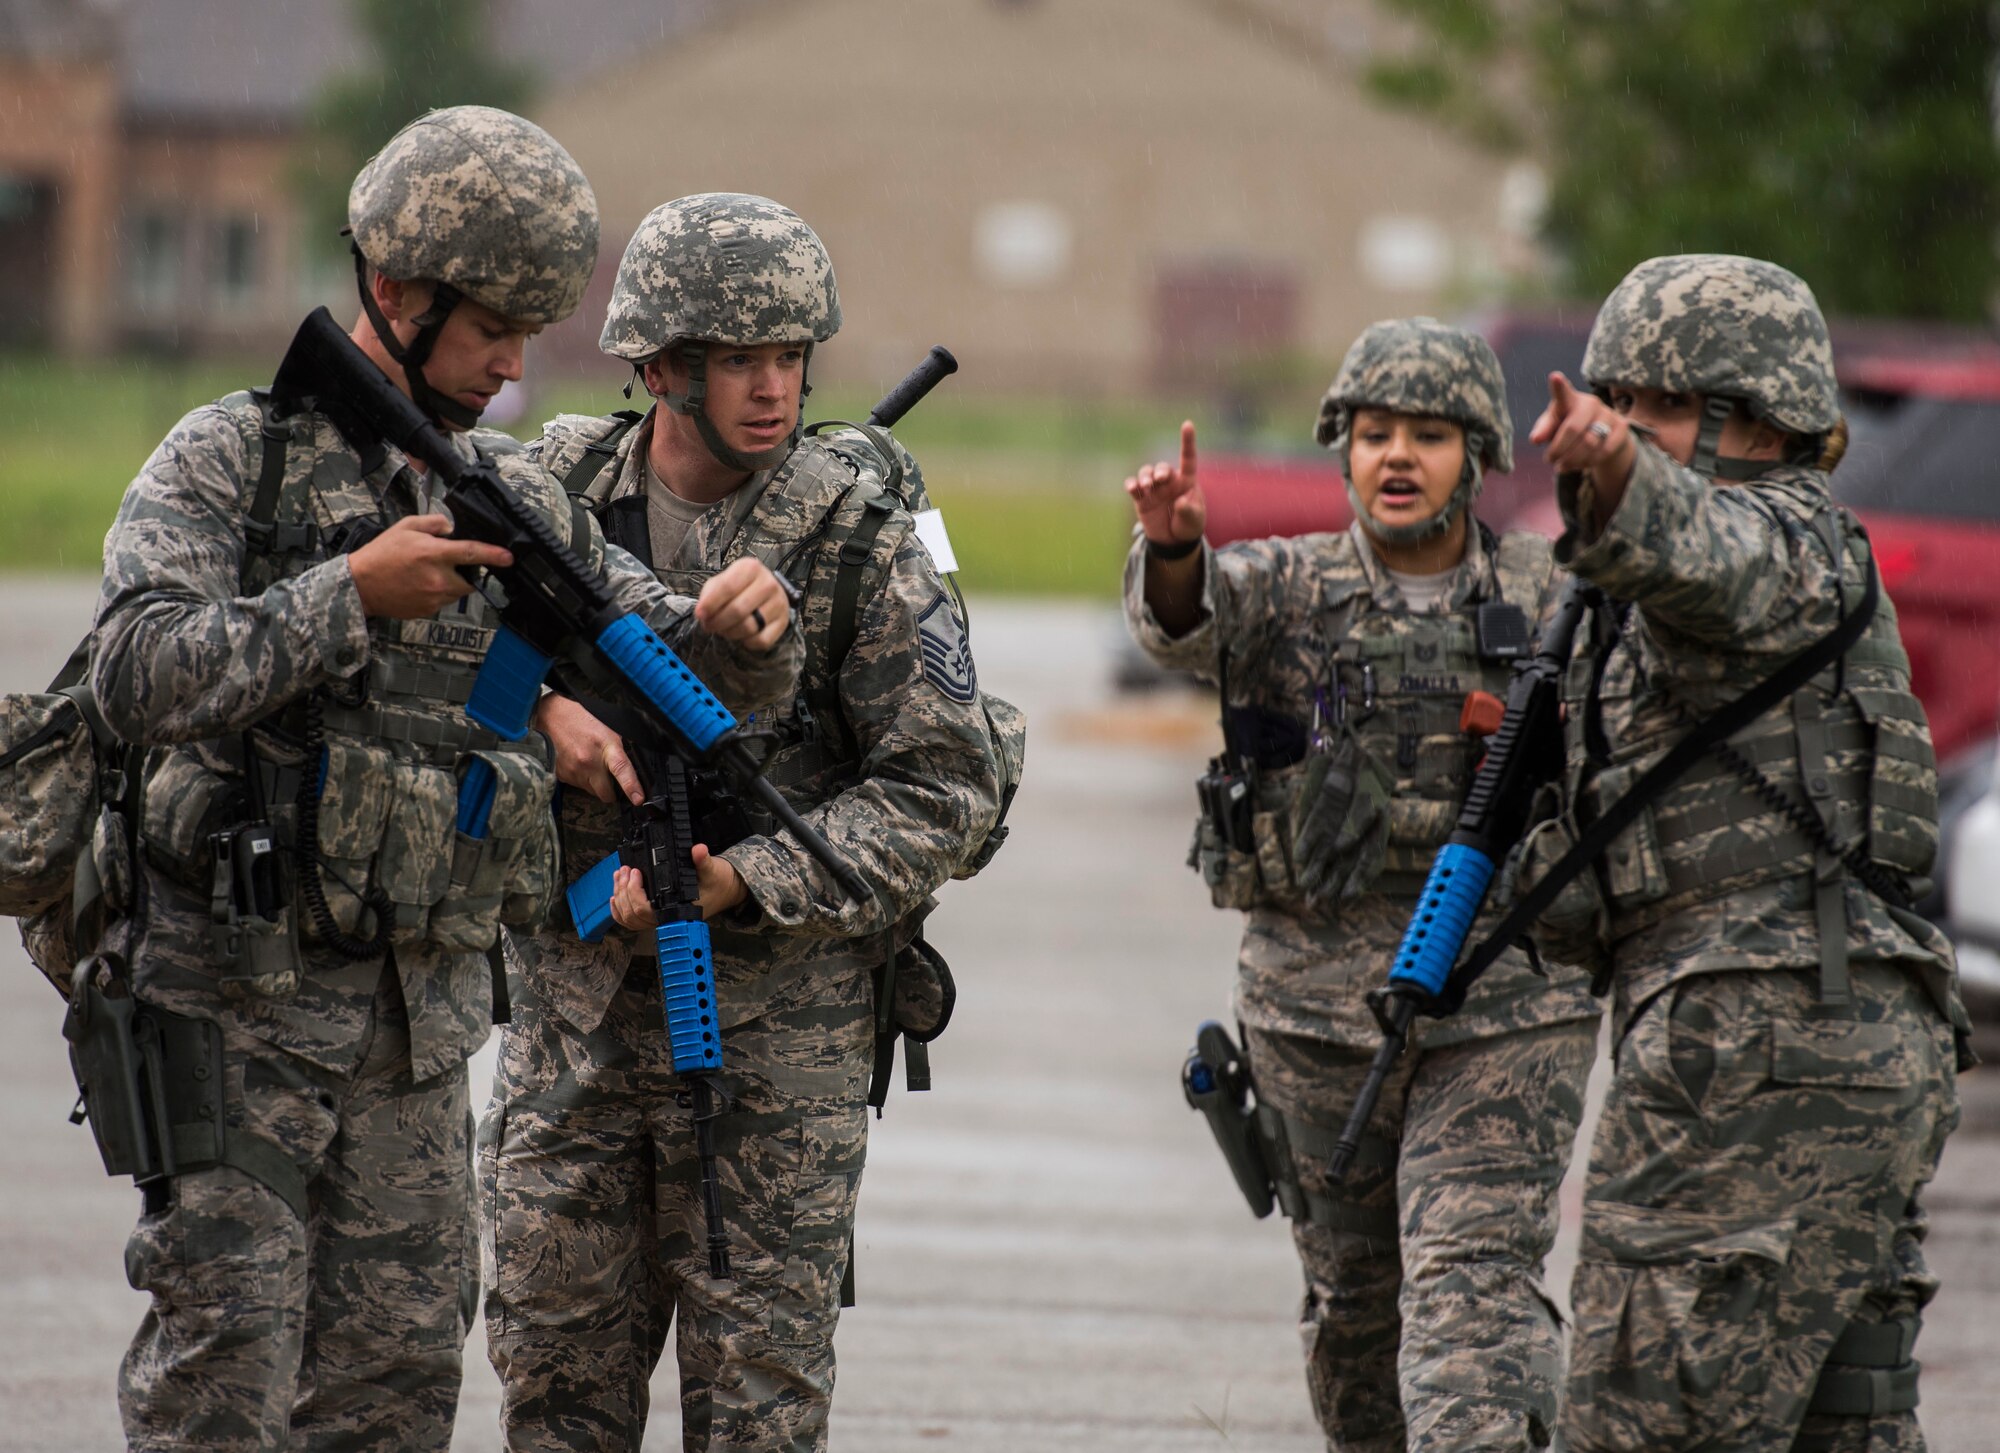 First Lt. Paul Kilquist, Master Sgt. Joshua Ray, Tech Sgt. Vanessa Amalla, and Staff Sgt. Alexa Marro, all with the 375th Security Forces Squadron, discuss an active shooter situation prior to entering the building during the exercise. According to the FBI reports, 2014 and 2015 each saw 20 active shooter incidents. This is more than any two-year average in the past 16 years, and nearly six times as many as the period between 2000 and 2001, the starting point for the FBI’s review. In all, not including any of the shooters, 92 people were killed and another 139 wounded in active shooter incidents between 2014 and 2015.